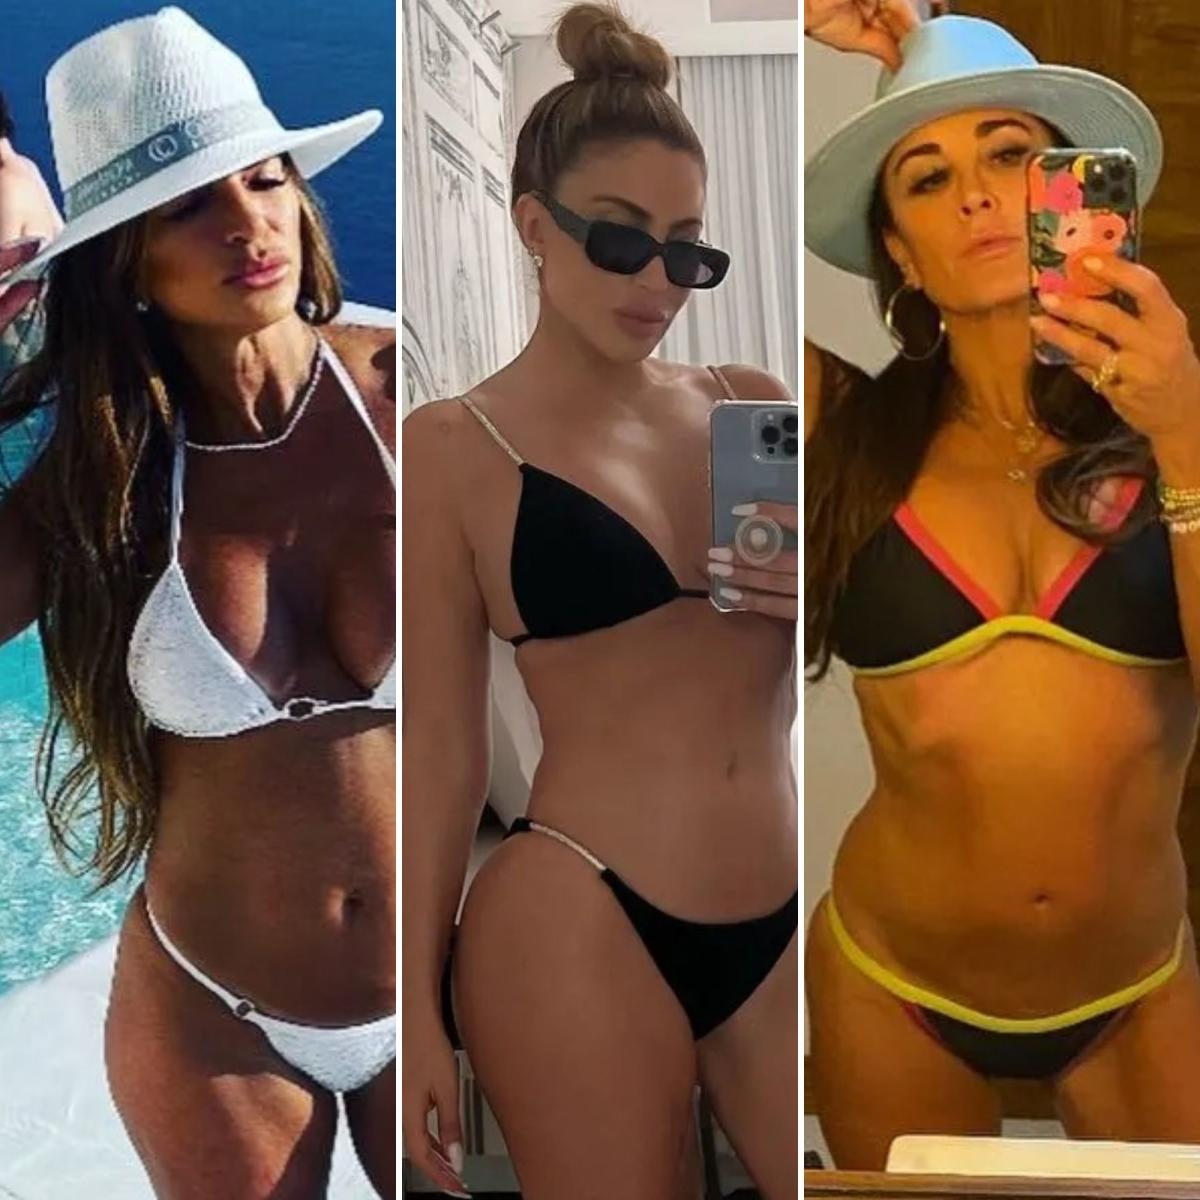 These Real Housewives Stars Are Seriously Hot See Their Best Bikini Moments Over the Years! picture